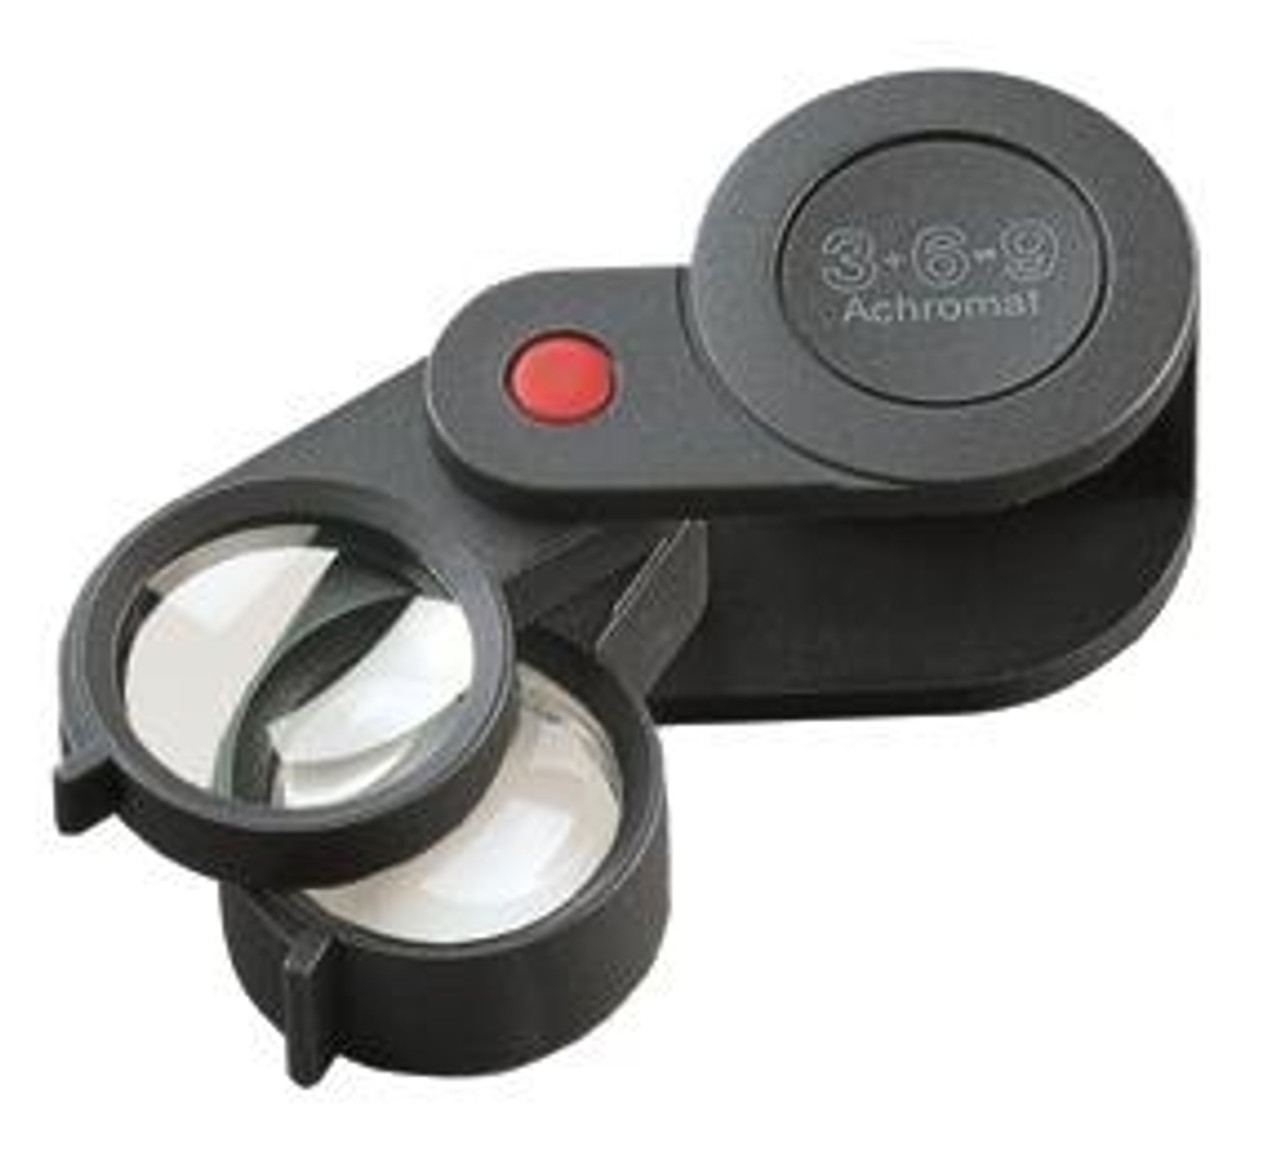 Eschenbach Mobilent Pocket Magnifier - Pocket Magnifying Glass with 4X, 7X,  & 10x Magnification - Compact Folding Pocket Magnifier & Low Vision